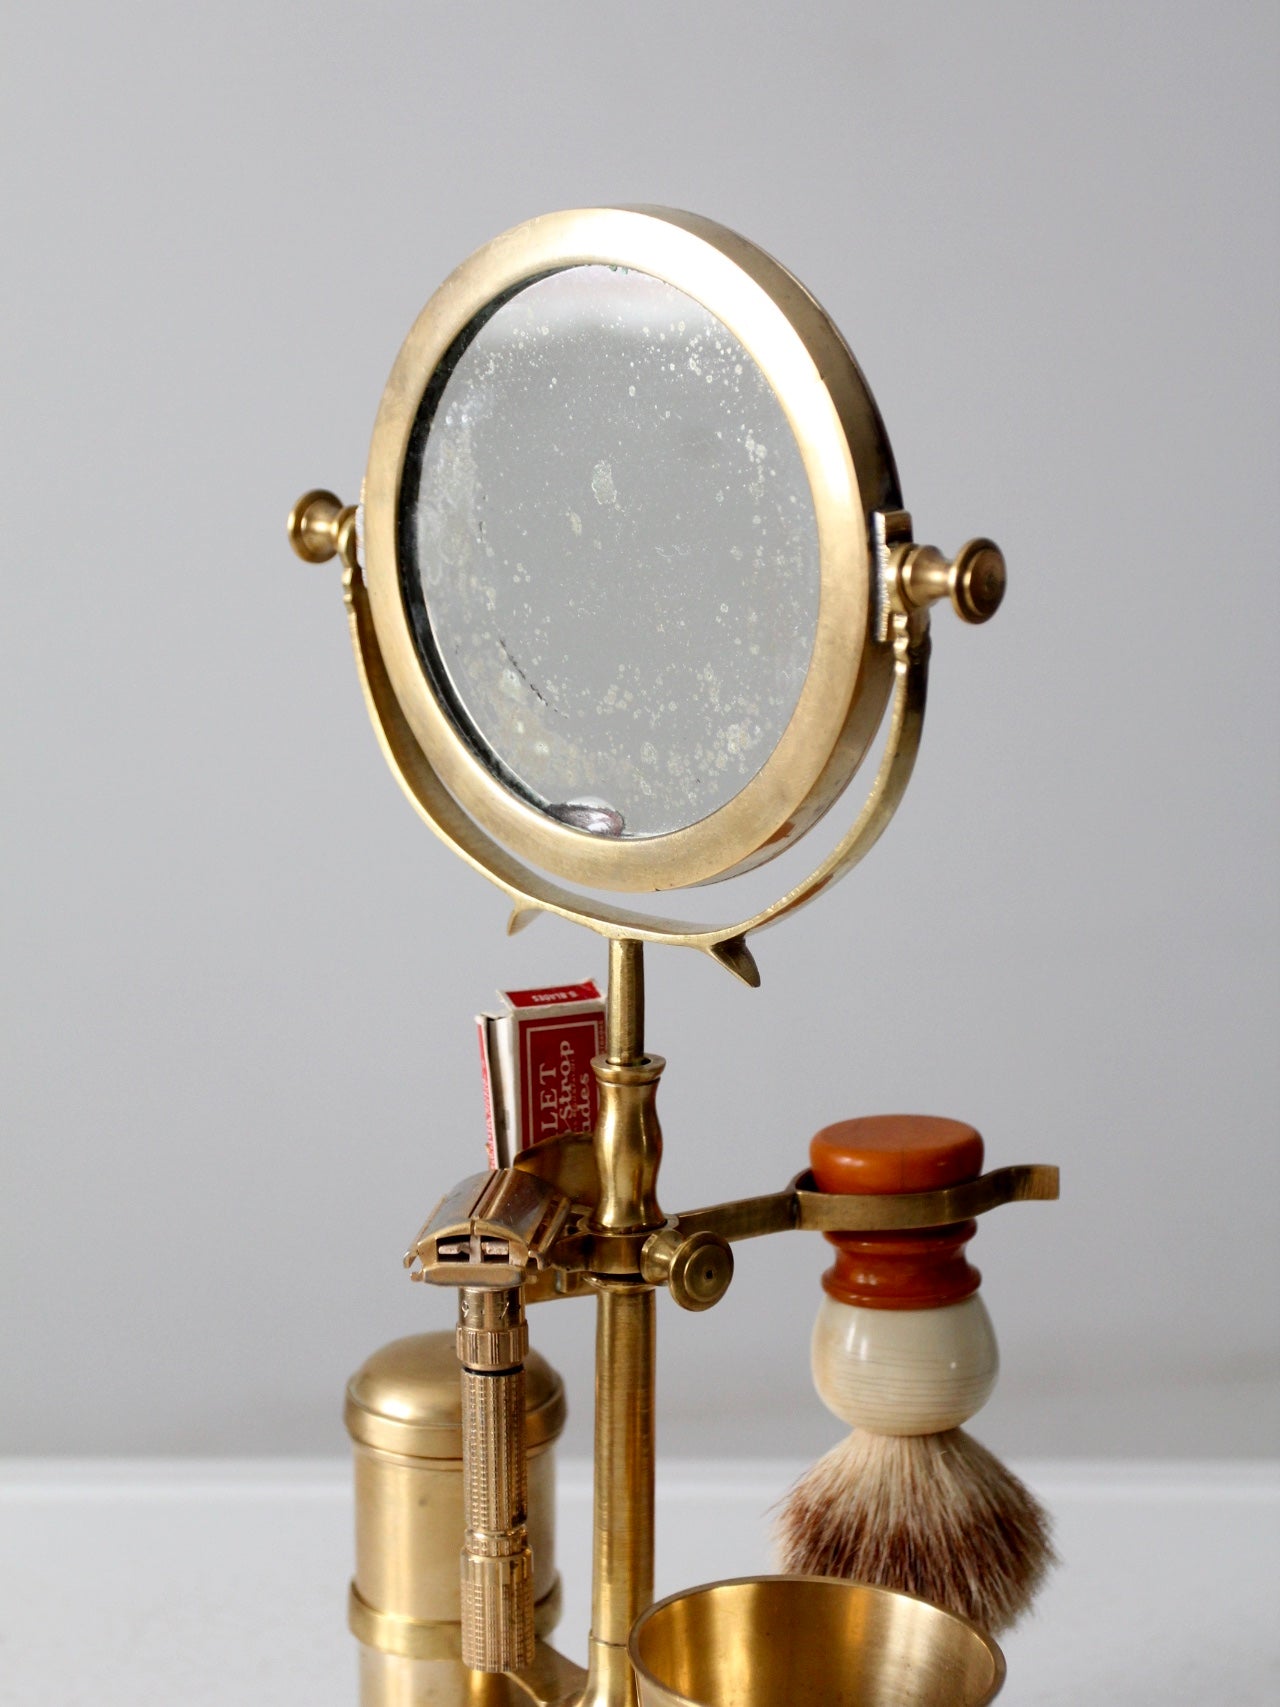 antique brass grooming stand with mirror and Gillette razor – 86